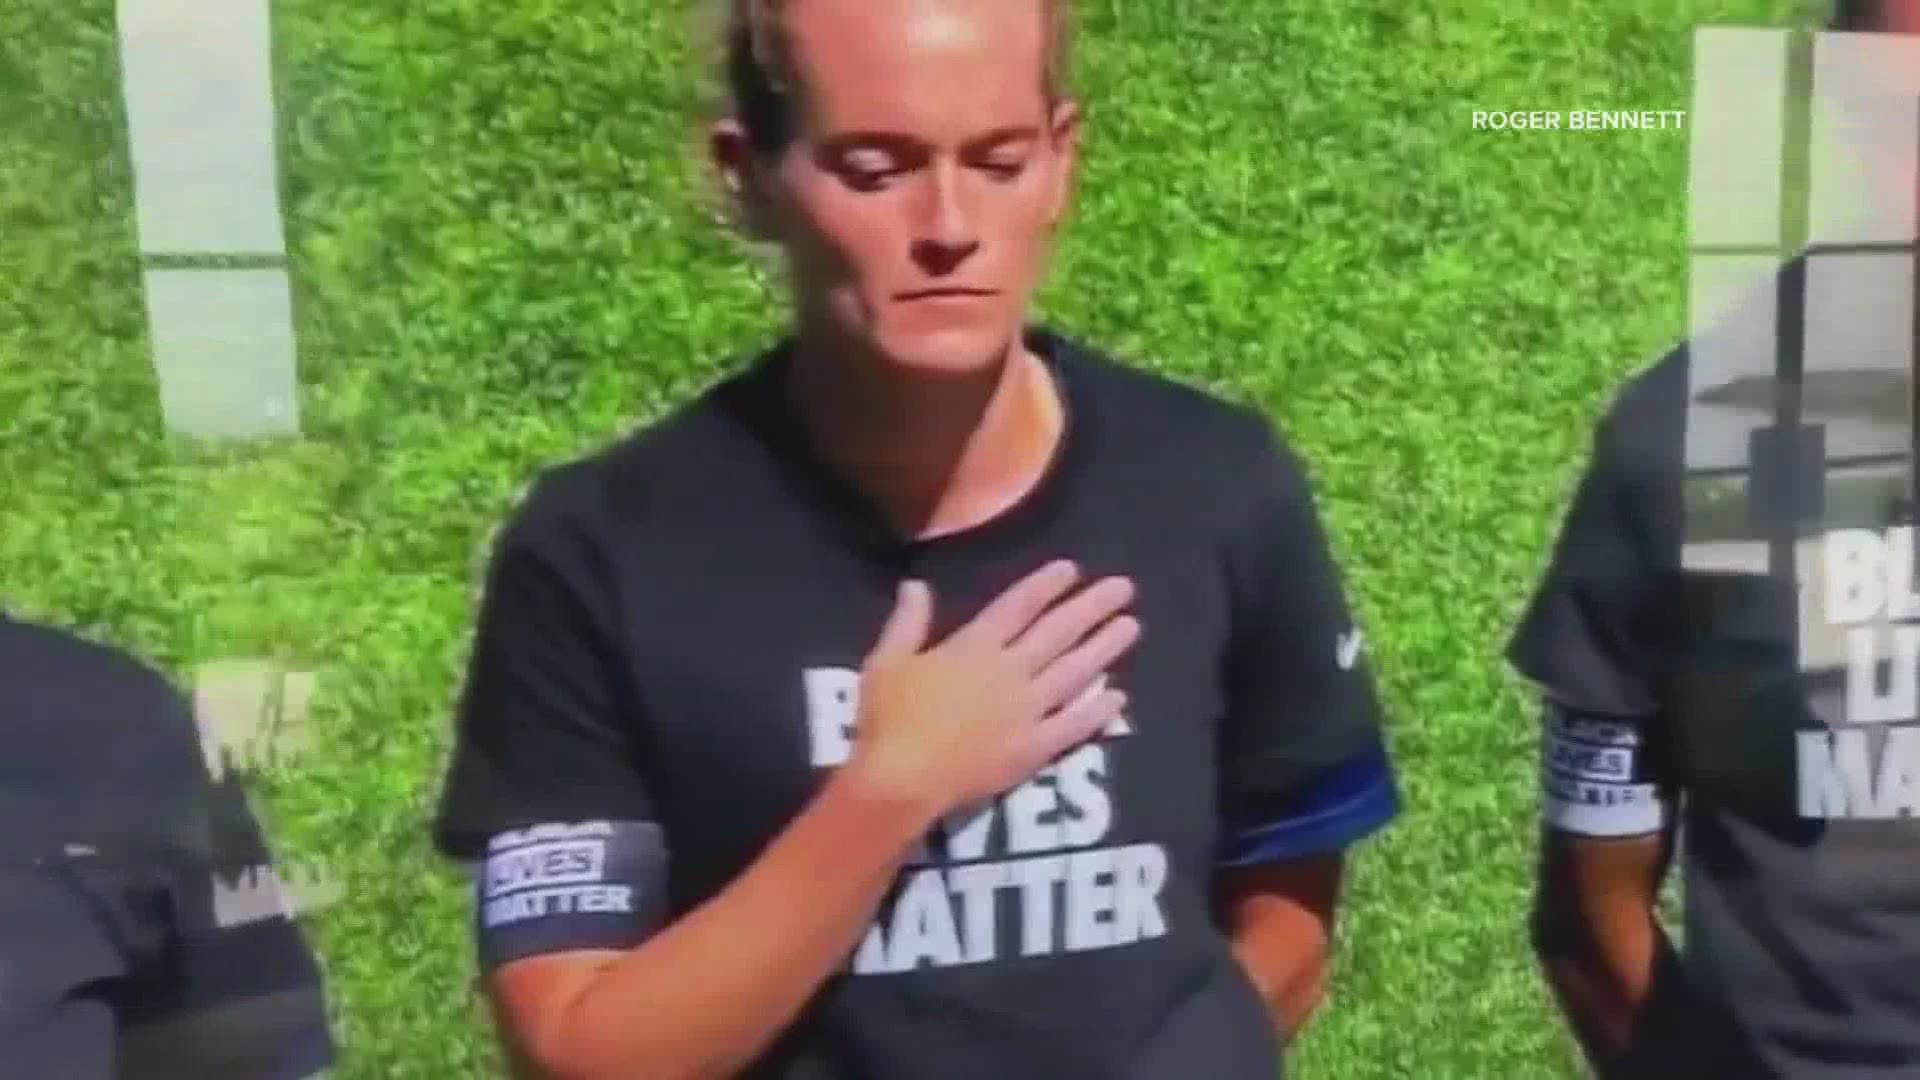 Players for the Portland Thorns and the North Carolina Courage knelt during the national anthem Saturday.